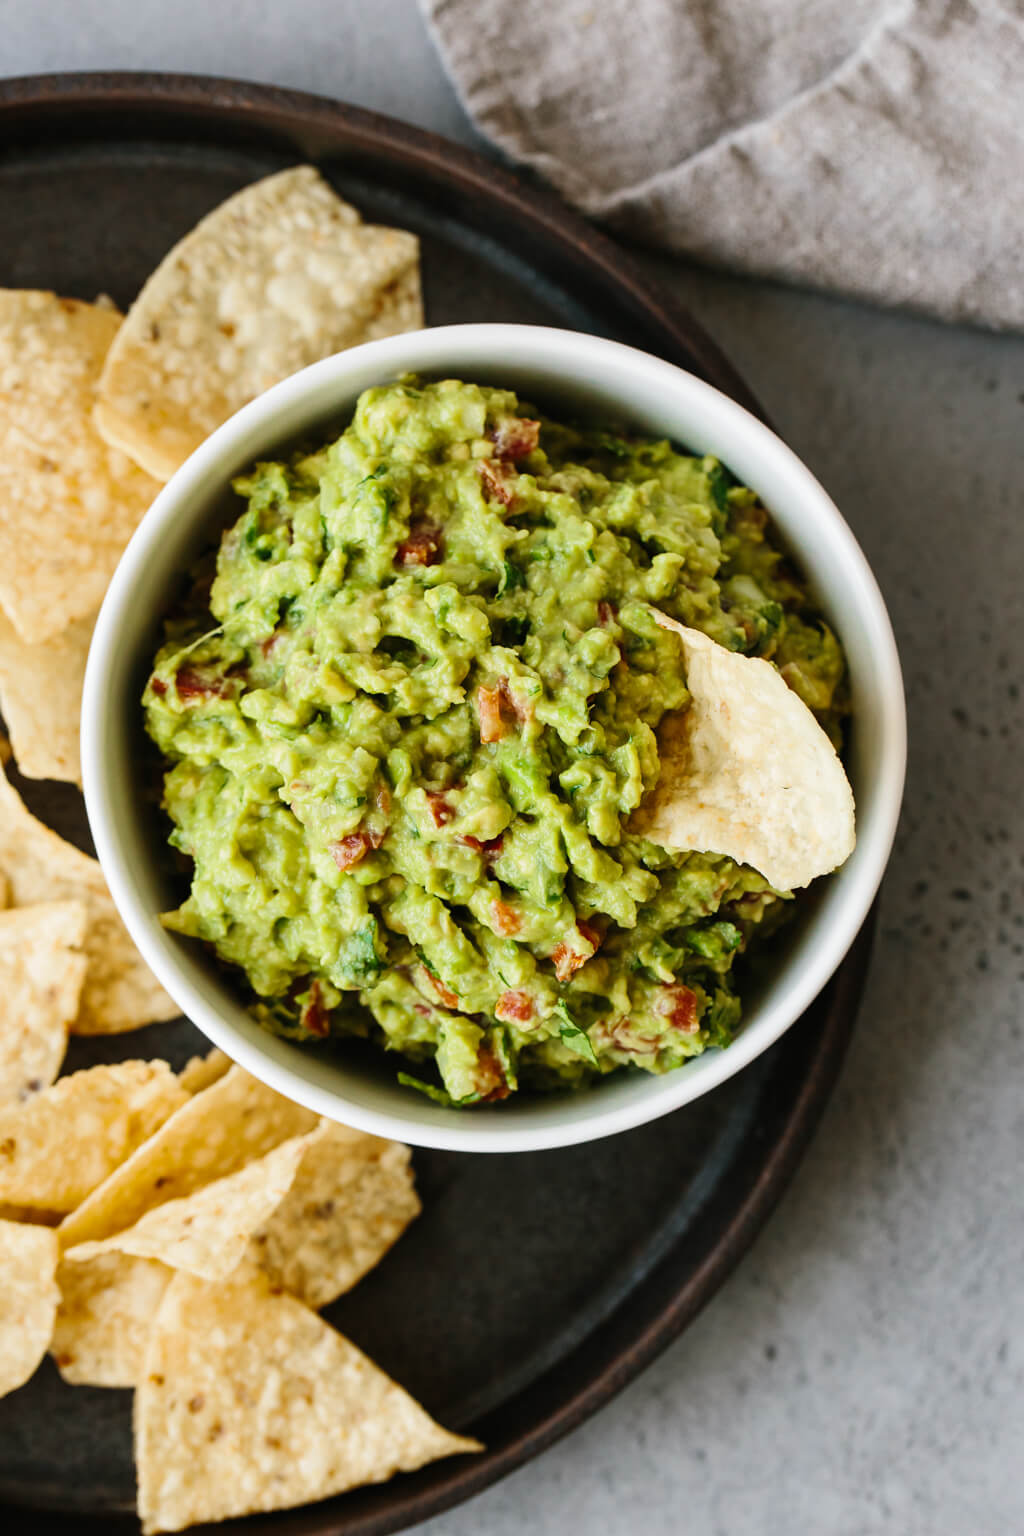 Guacamole in a bowl surrounded by chips. One chip in the guacamole.